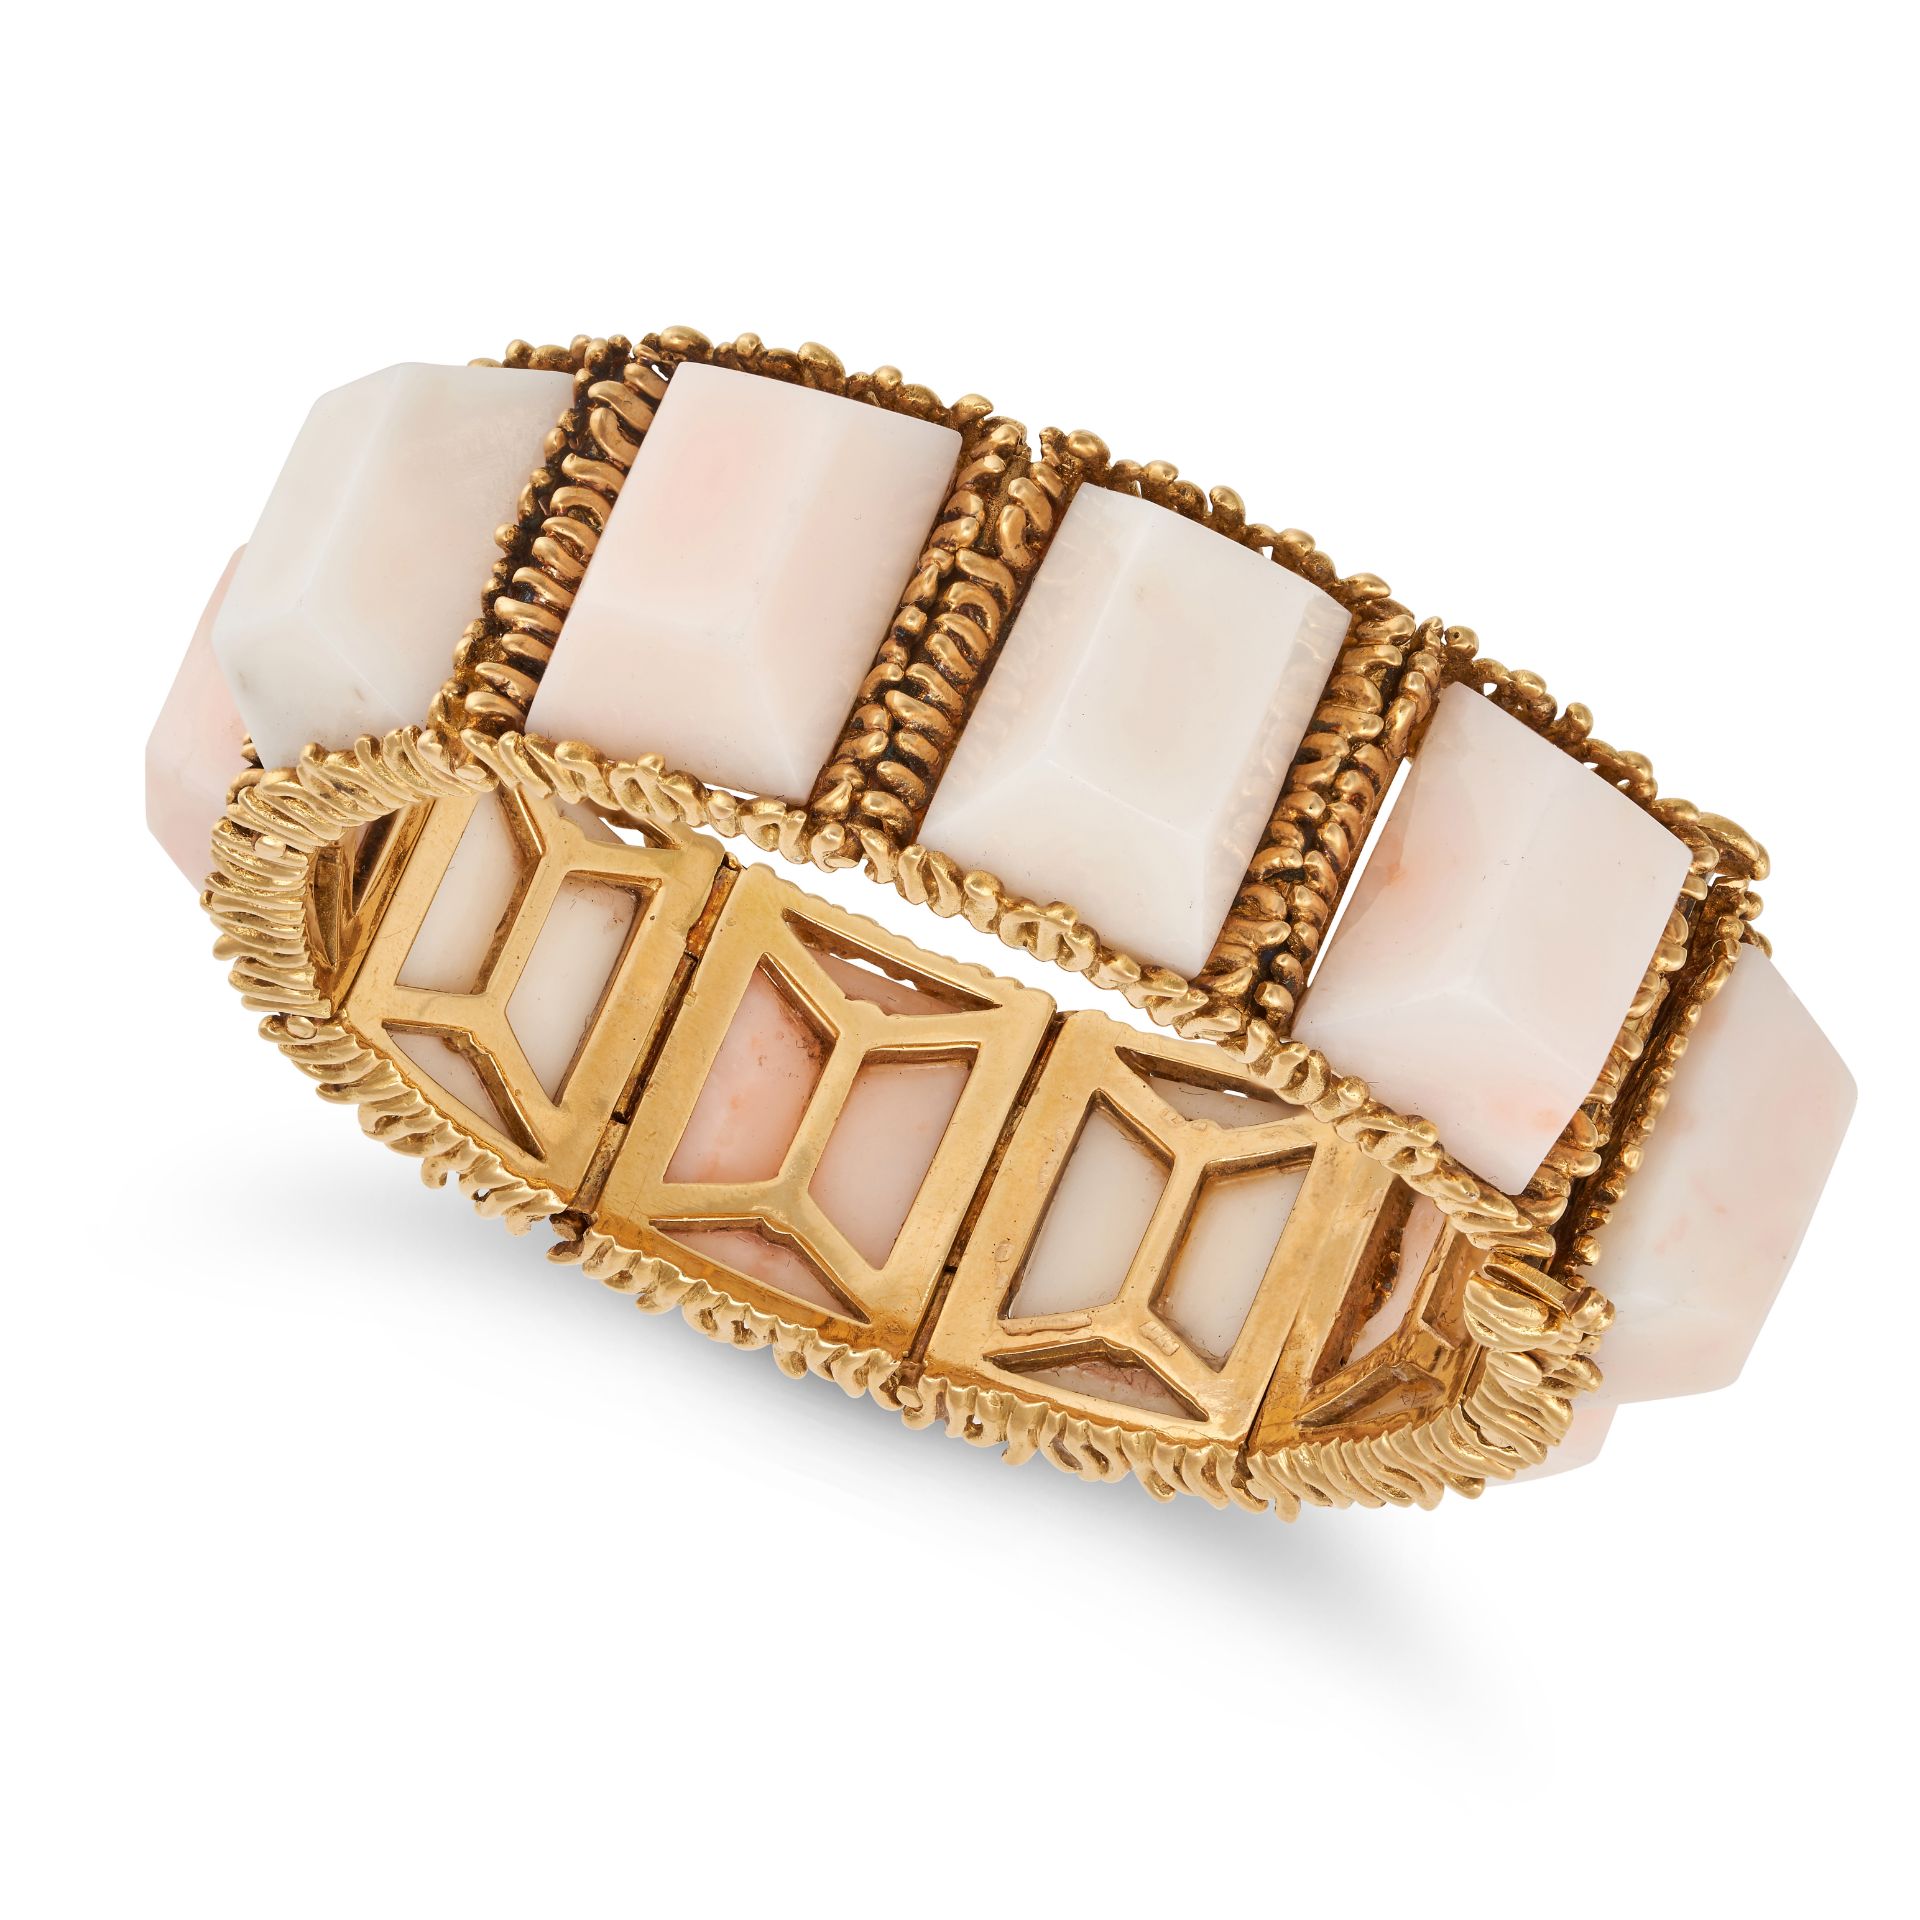 TIFFANY & CO., A FINE VINTAGE CORAL BRACELET in 18ct yellow gold, set throughout with geometric c... - Bild 3 aus 3